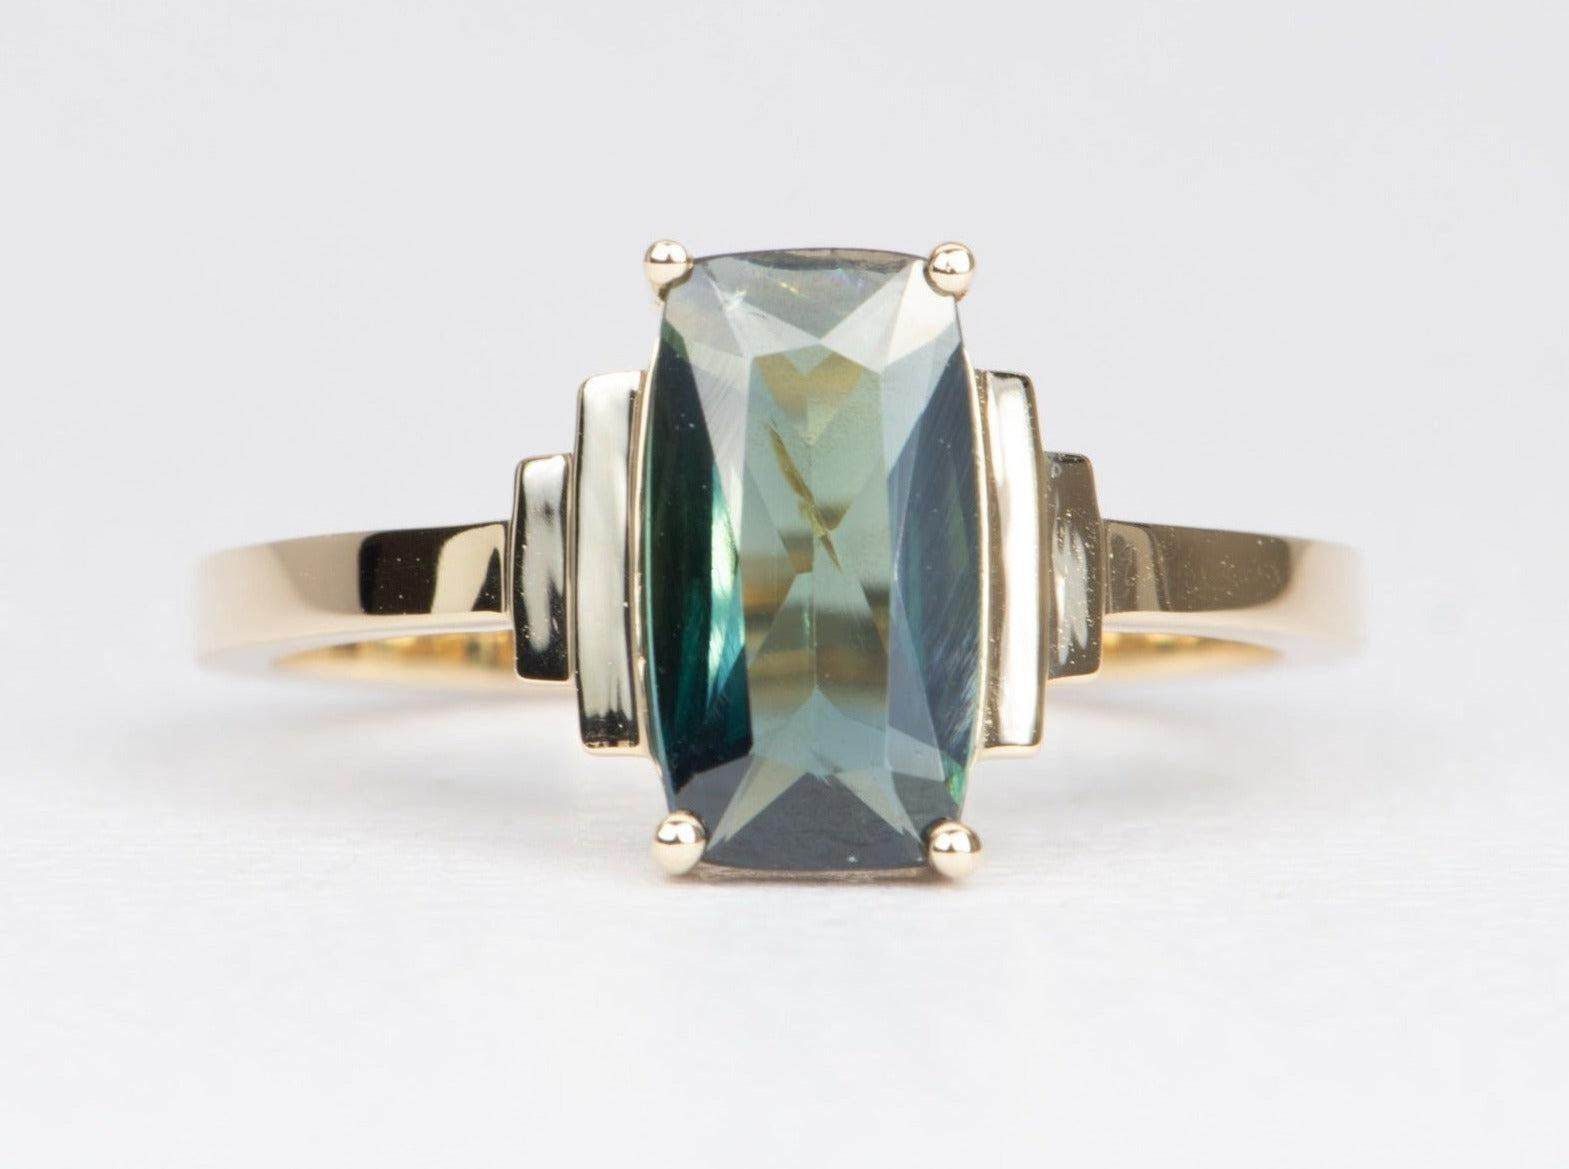 ♥ Solid 14k yellow gold engagement ring set with a beautiful teal blue Nigerian sapphire
��♥ Gorgeous blue green color!
♥ The item measures 11 mm in length, 10.5 mm in width, and stands 3.7 mm from the finger

♥ US Size 8 (Free resizing up or down 1